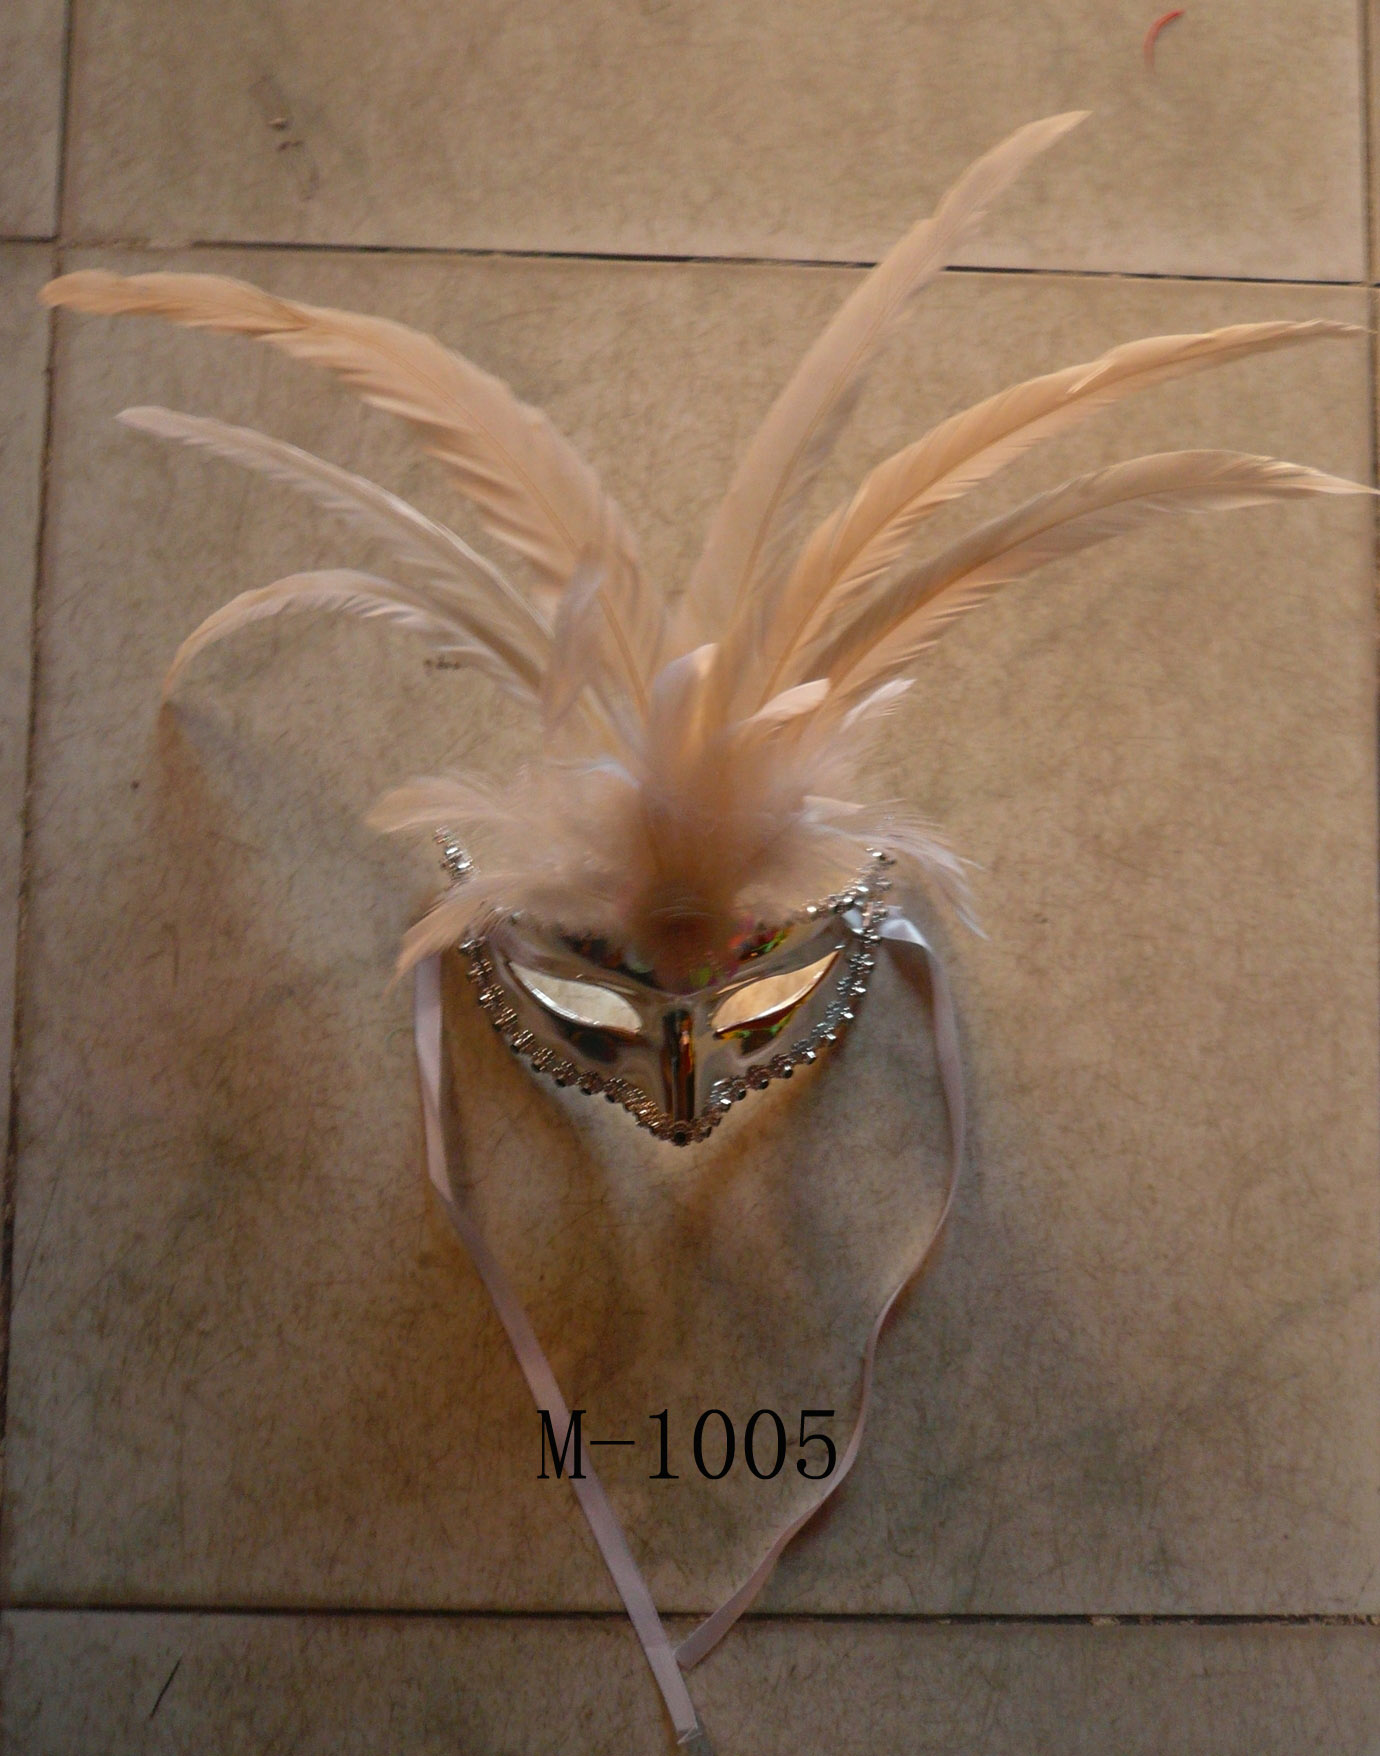 Cheap feather masks for sale - Made in China M-1005